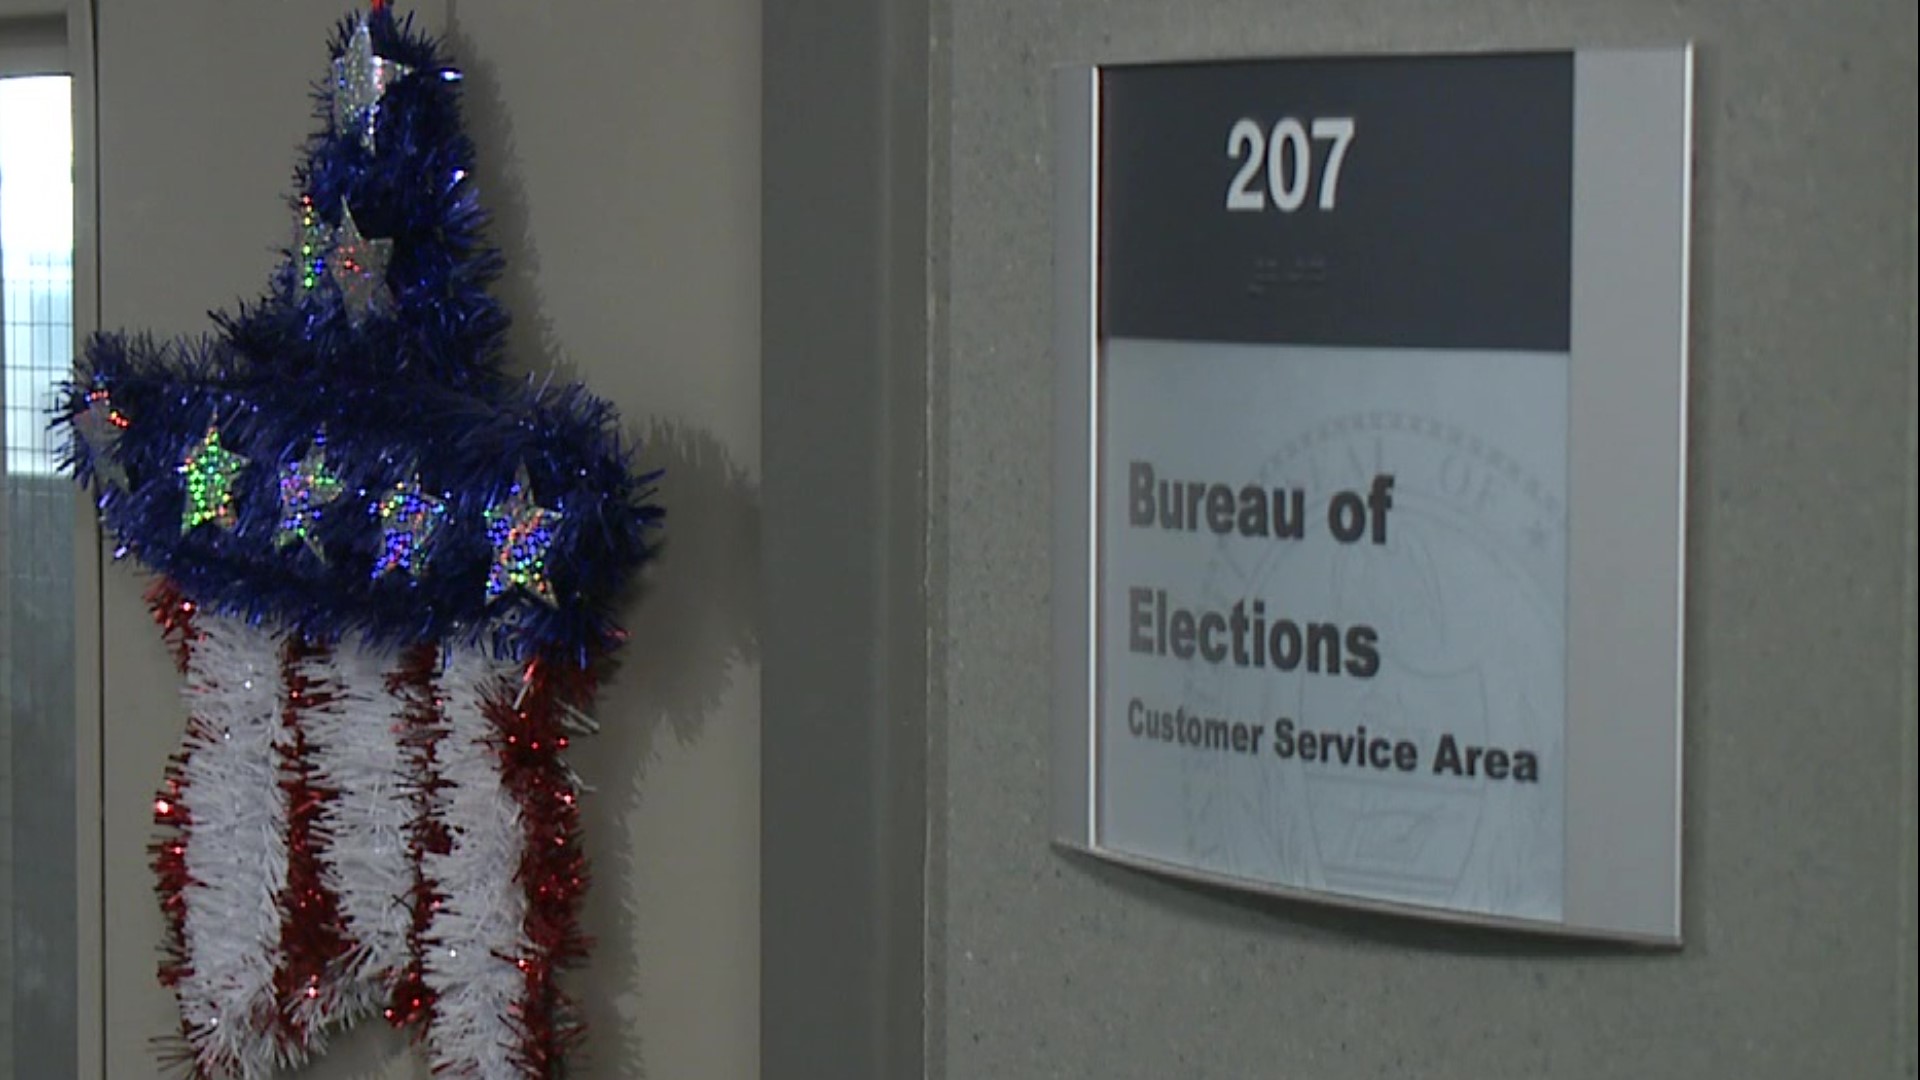 305 voters may not have received their mail-in ballot in time to vote by mail.